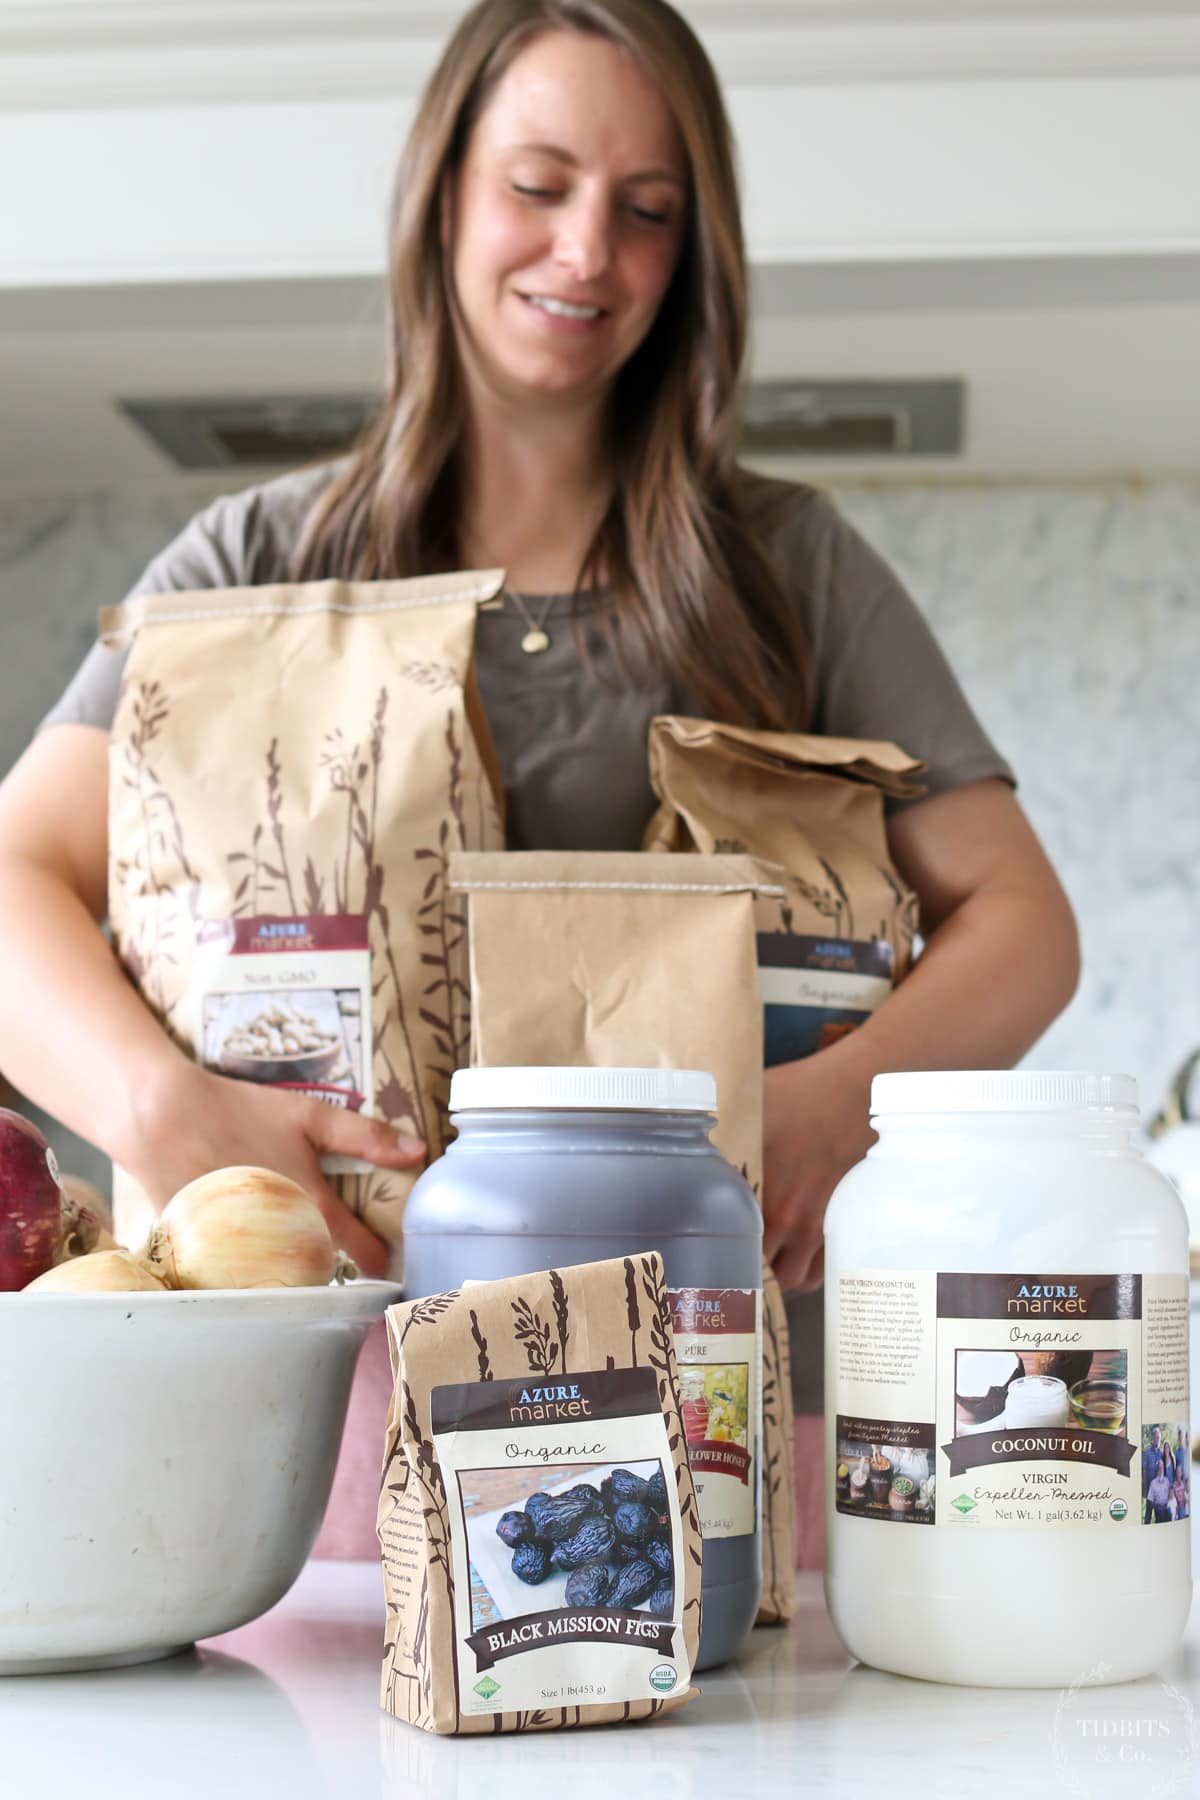 A woman holds packages of healthy, organic food